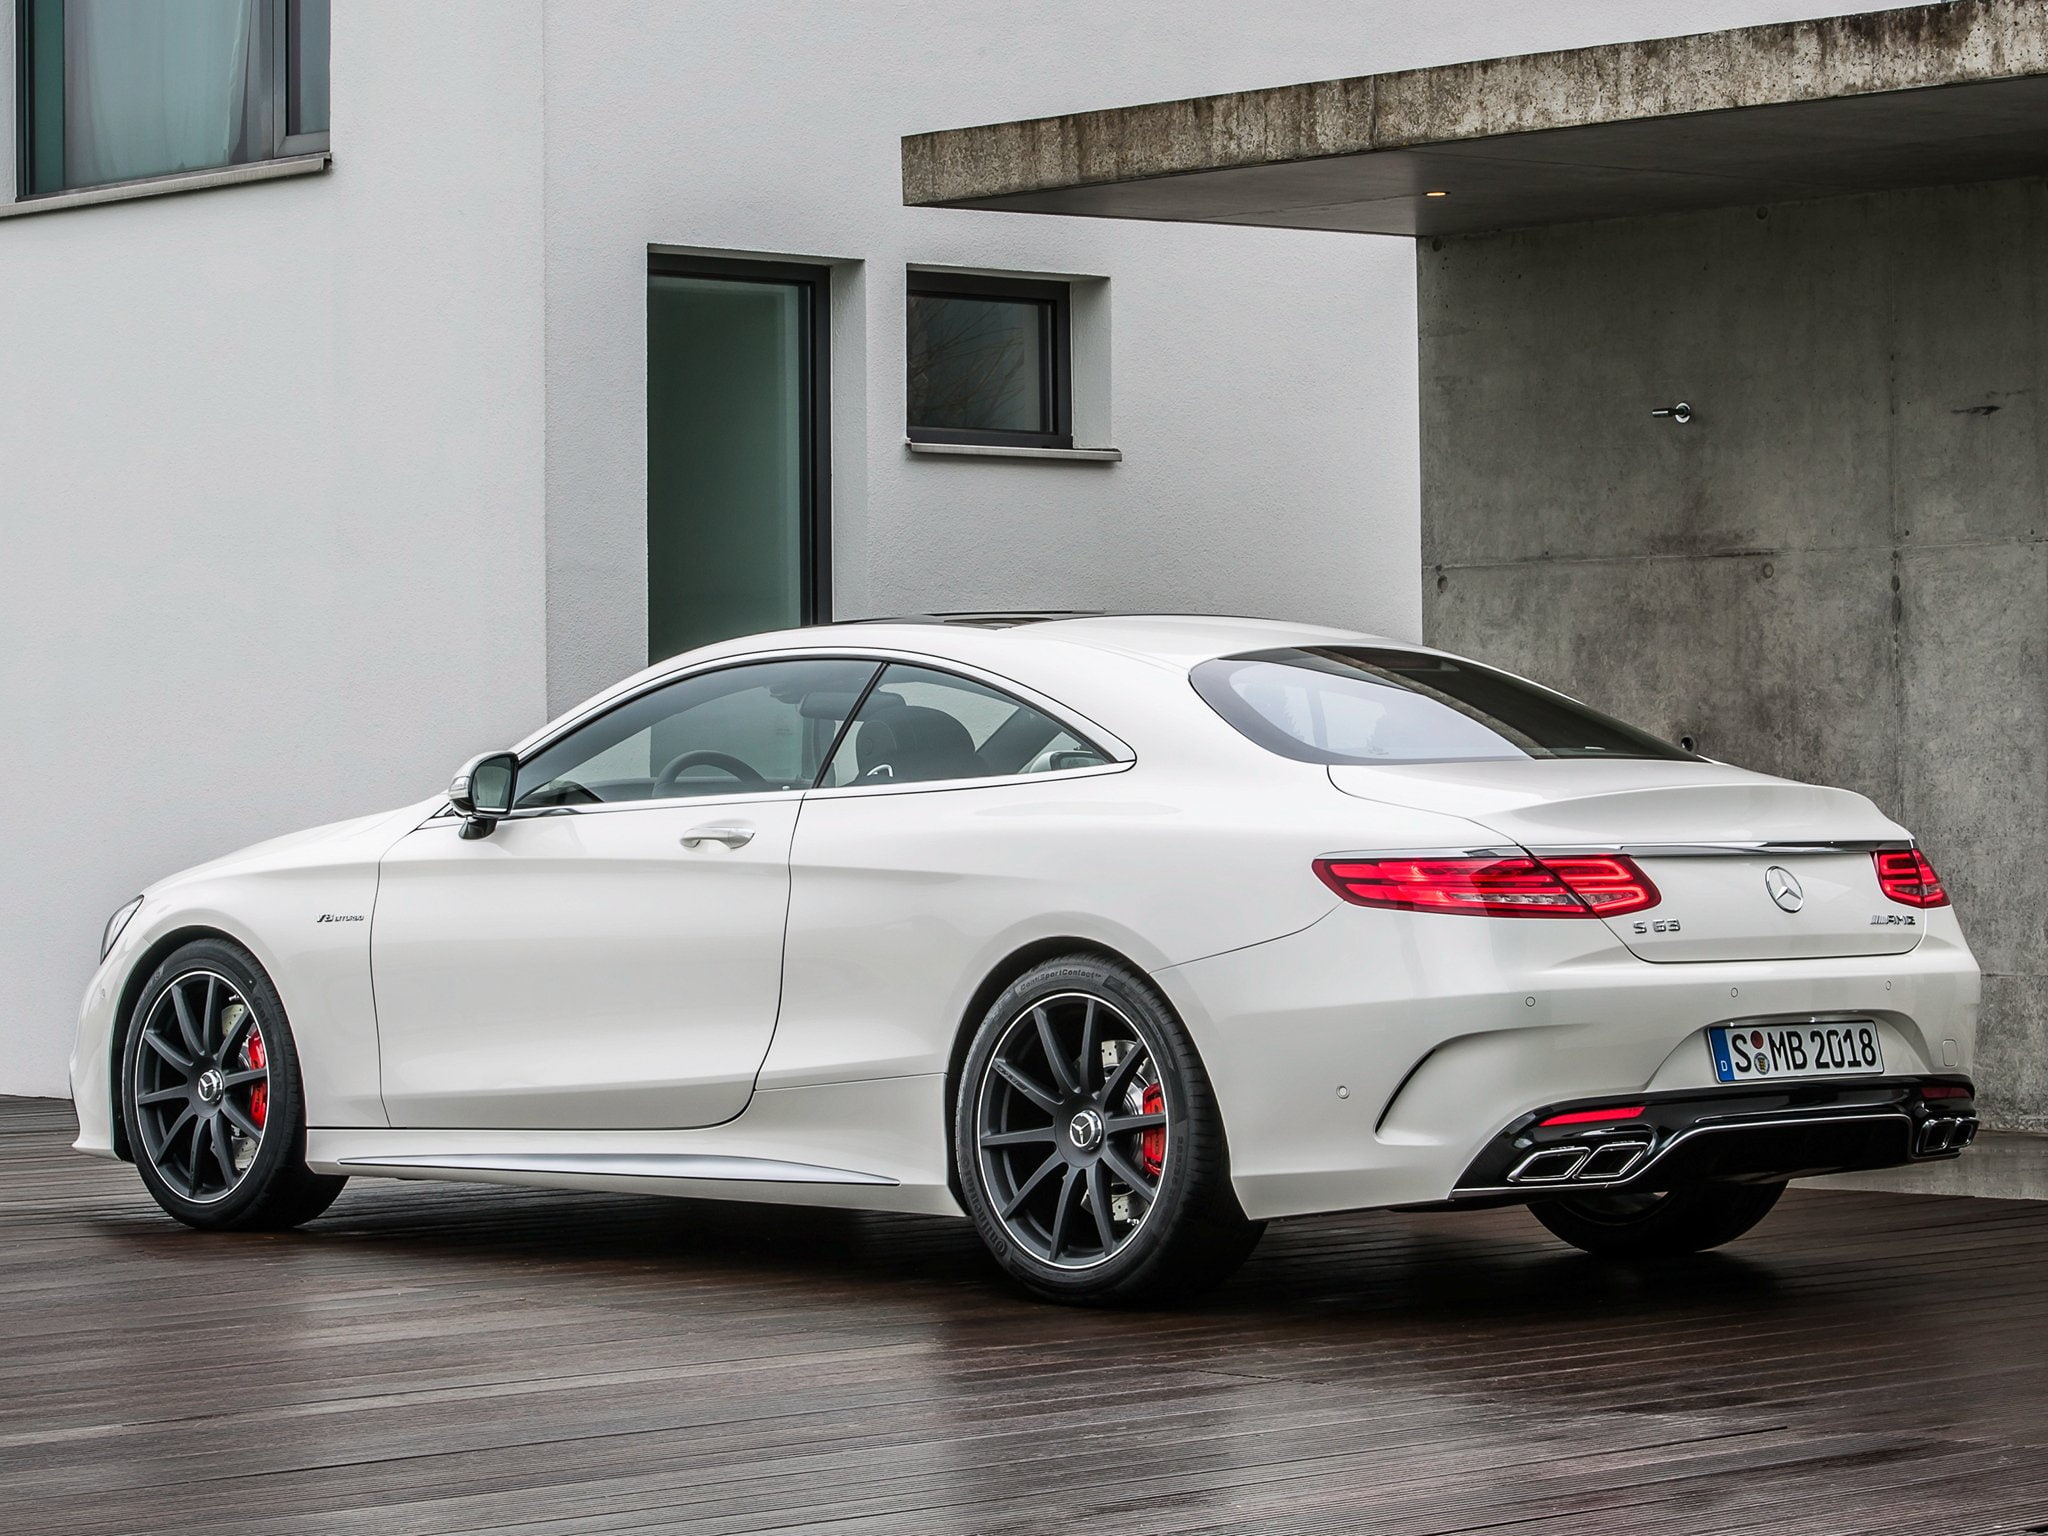 2014, amg, benz, c217, coupe, mercedes, s63